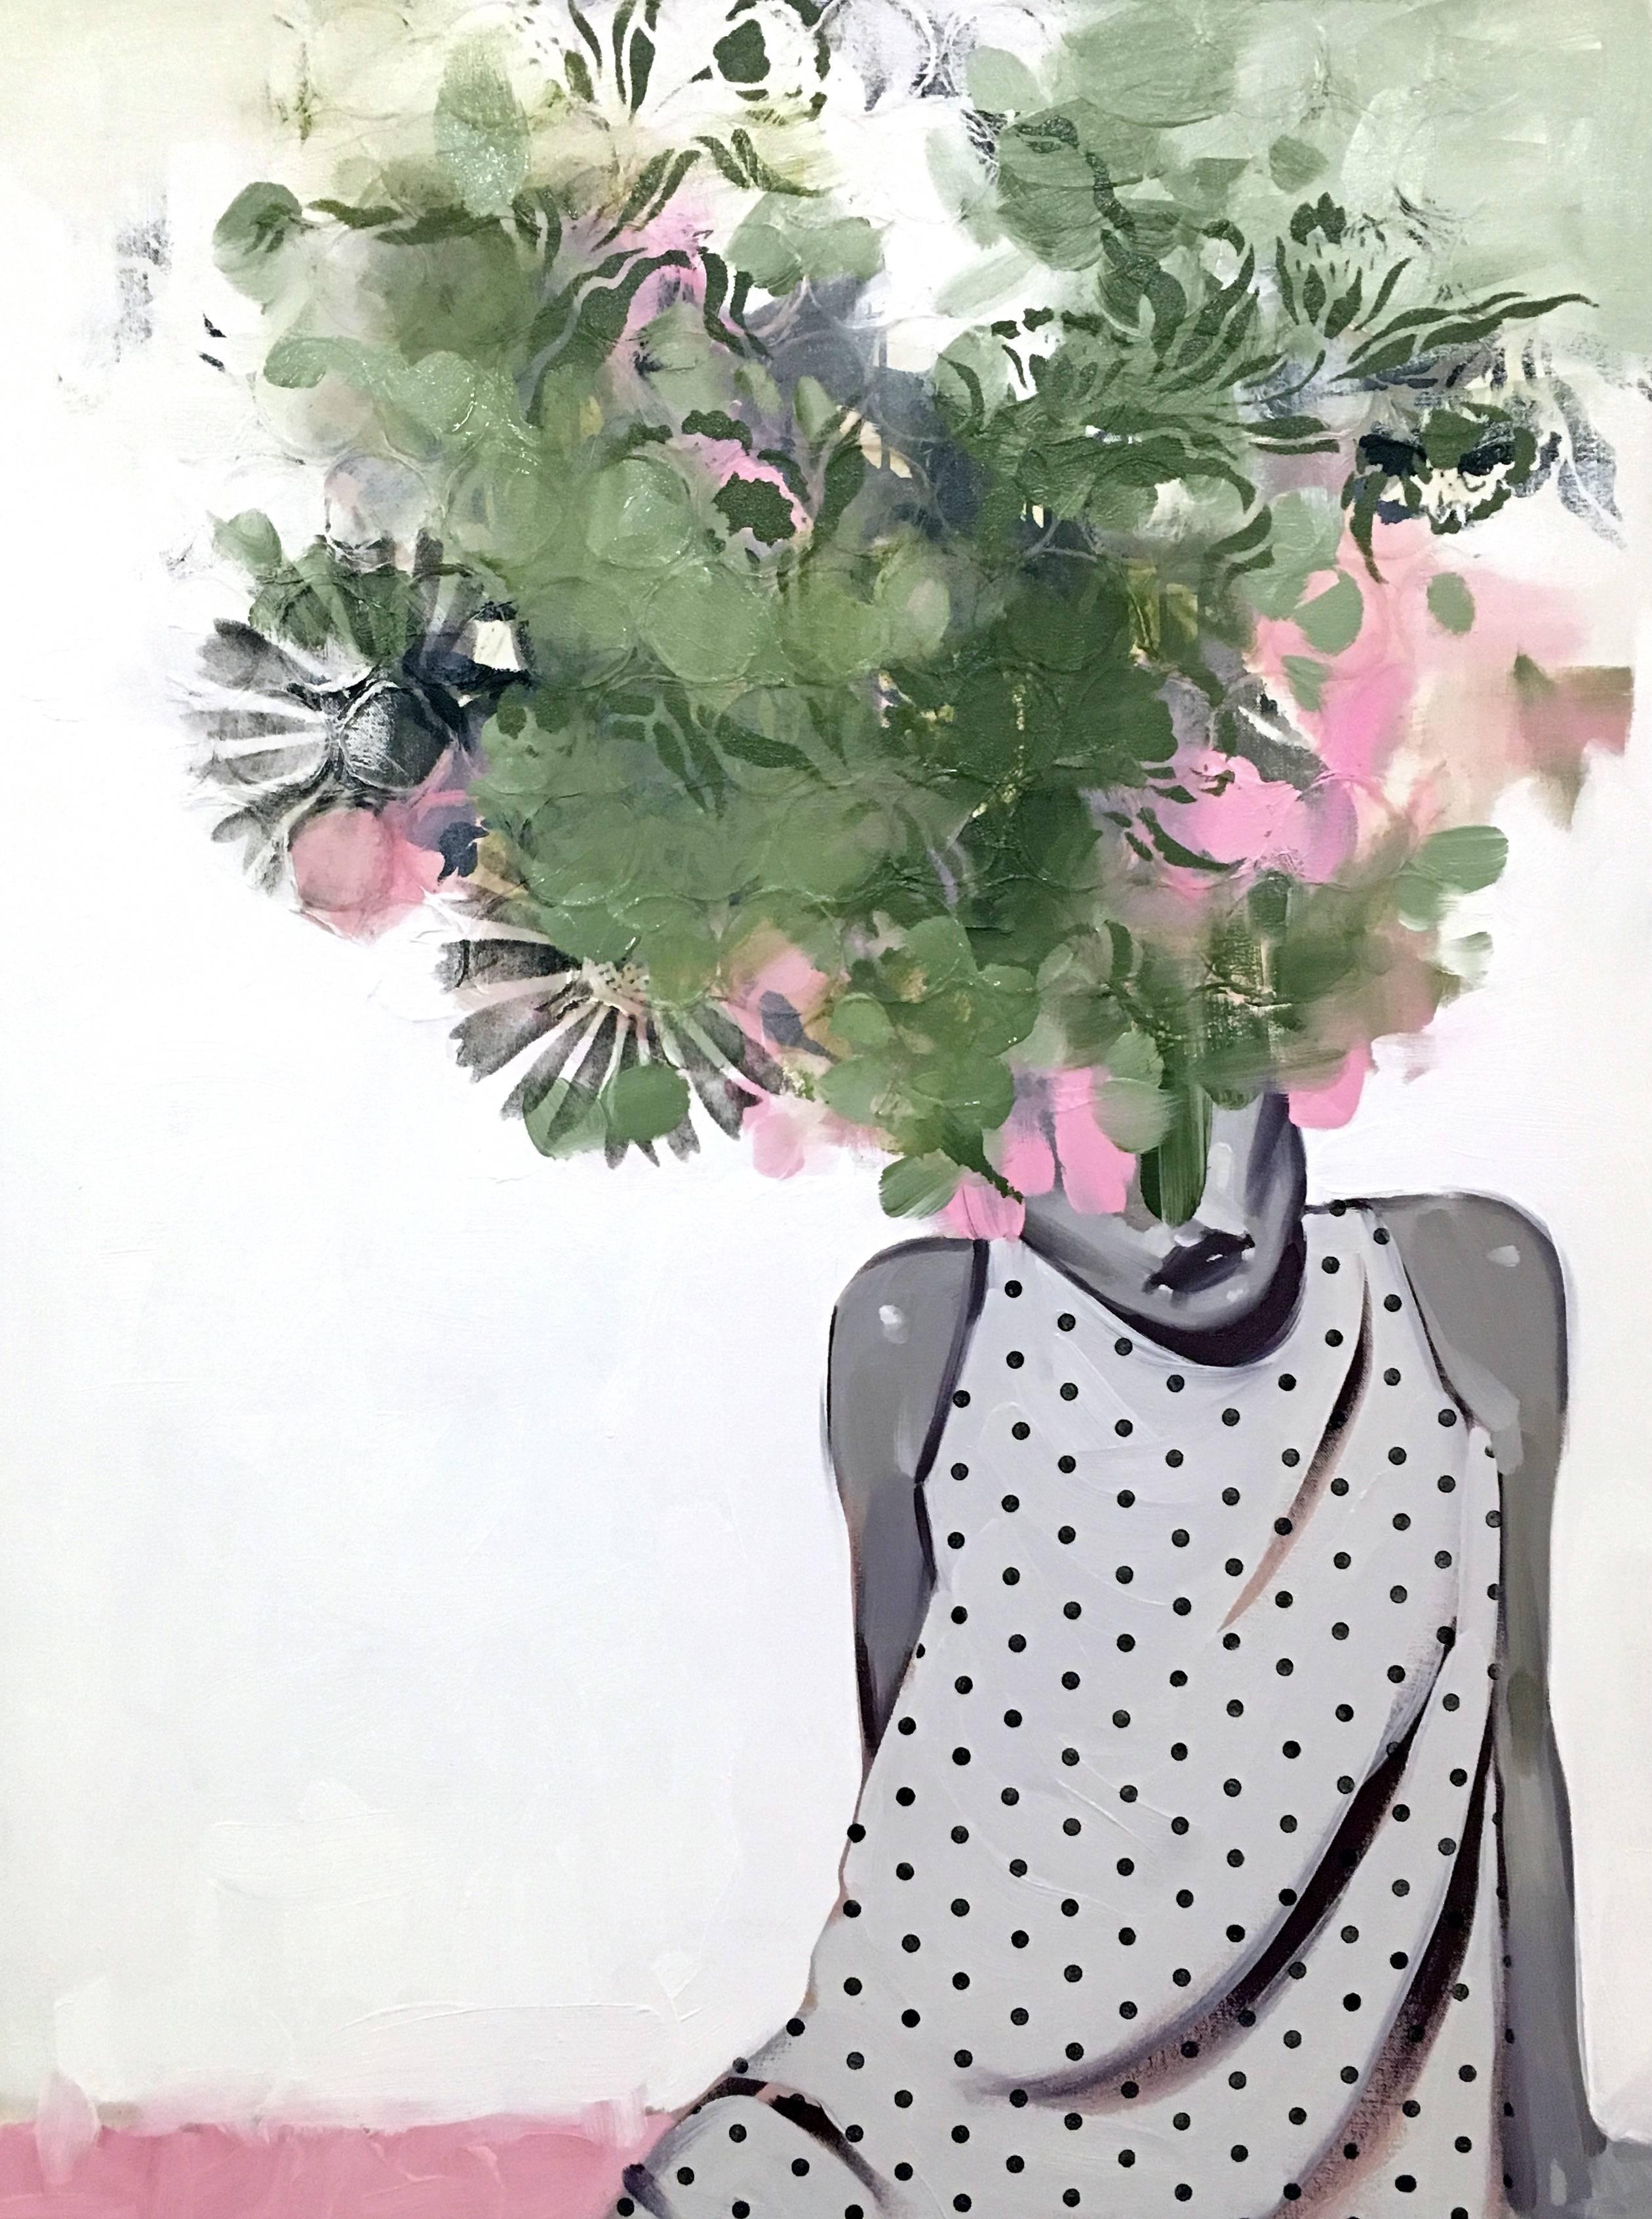 Anna Kincaide Figurative Painting - "I Only Miss You When the Sun Goes Down" Woman in polka dots with floral bouquet